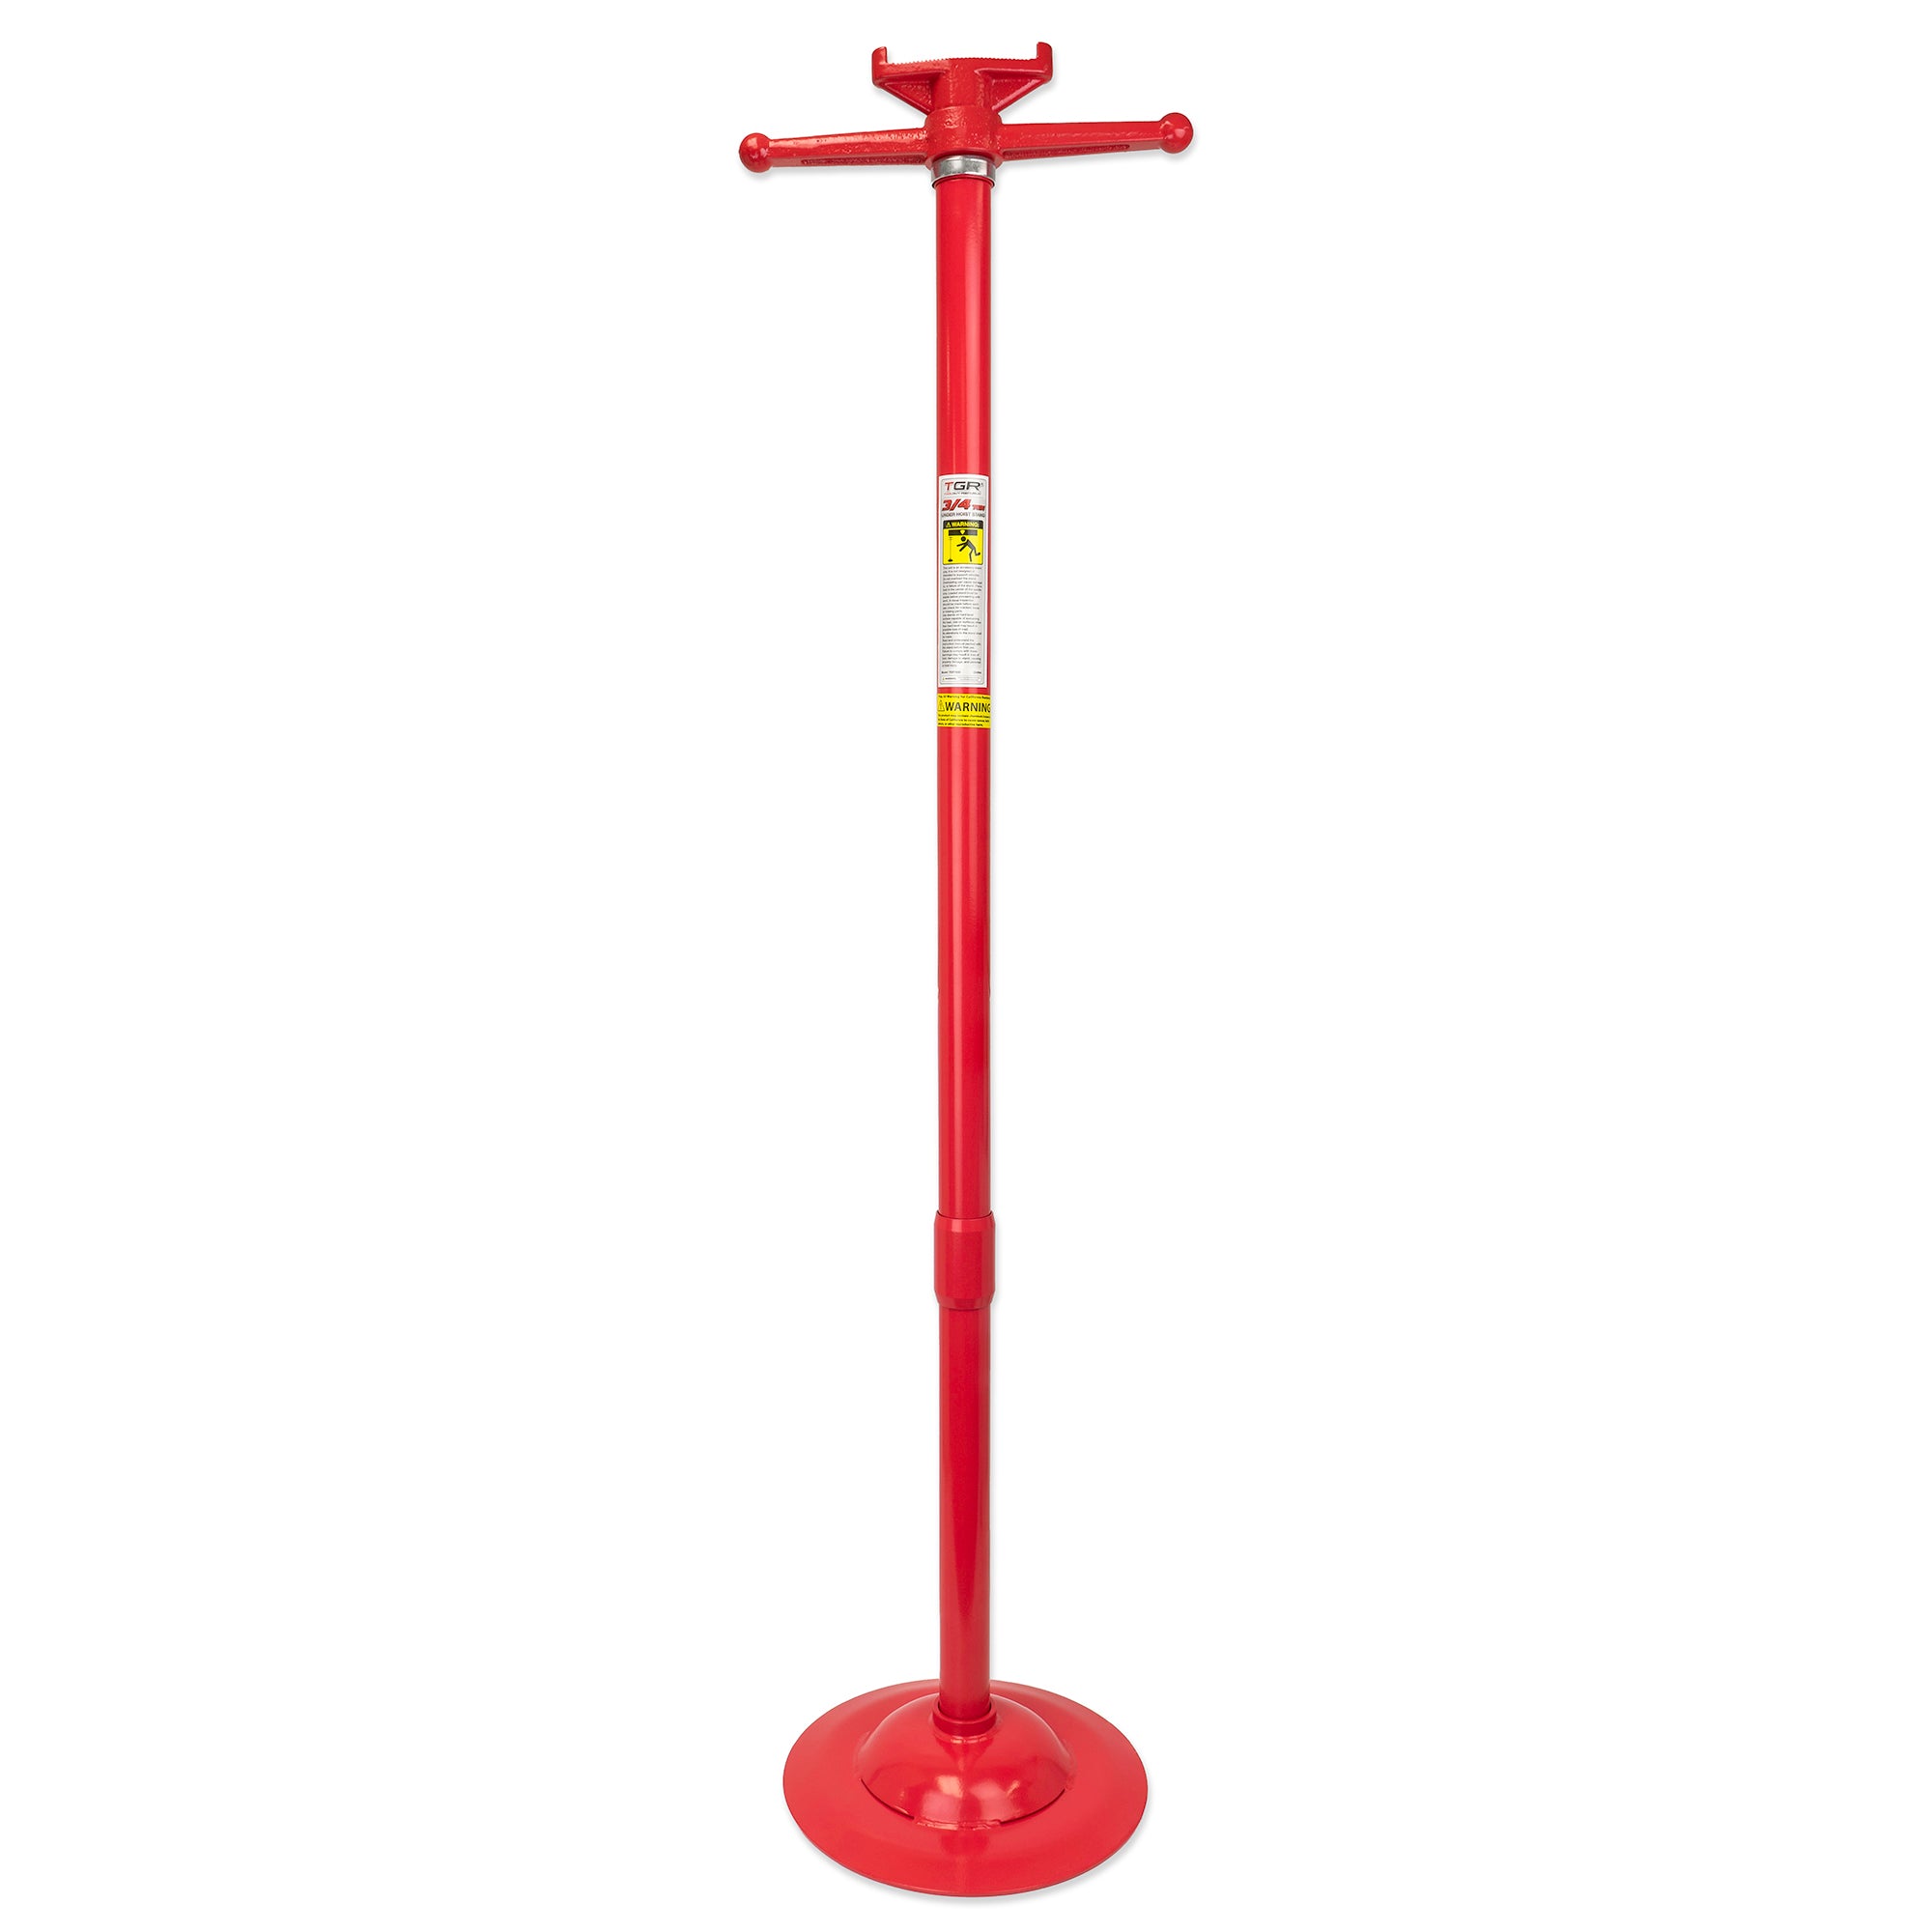 TGR Underhoist Support Stand 3/4 Ton Capacity, Threaded Base, Supports Vehicle Components